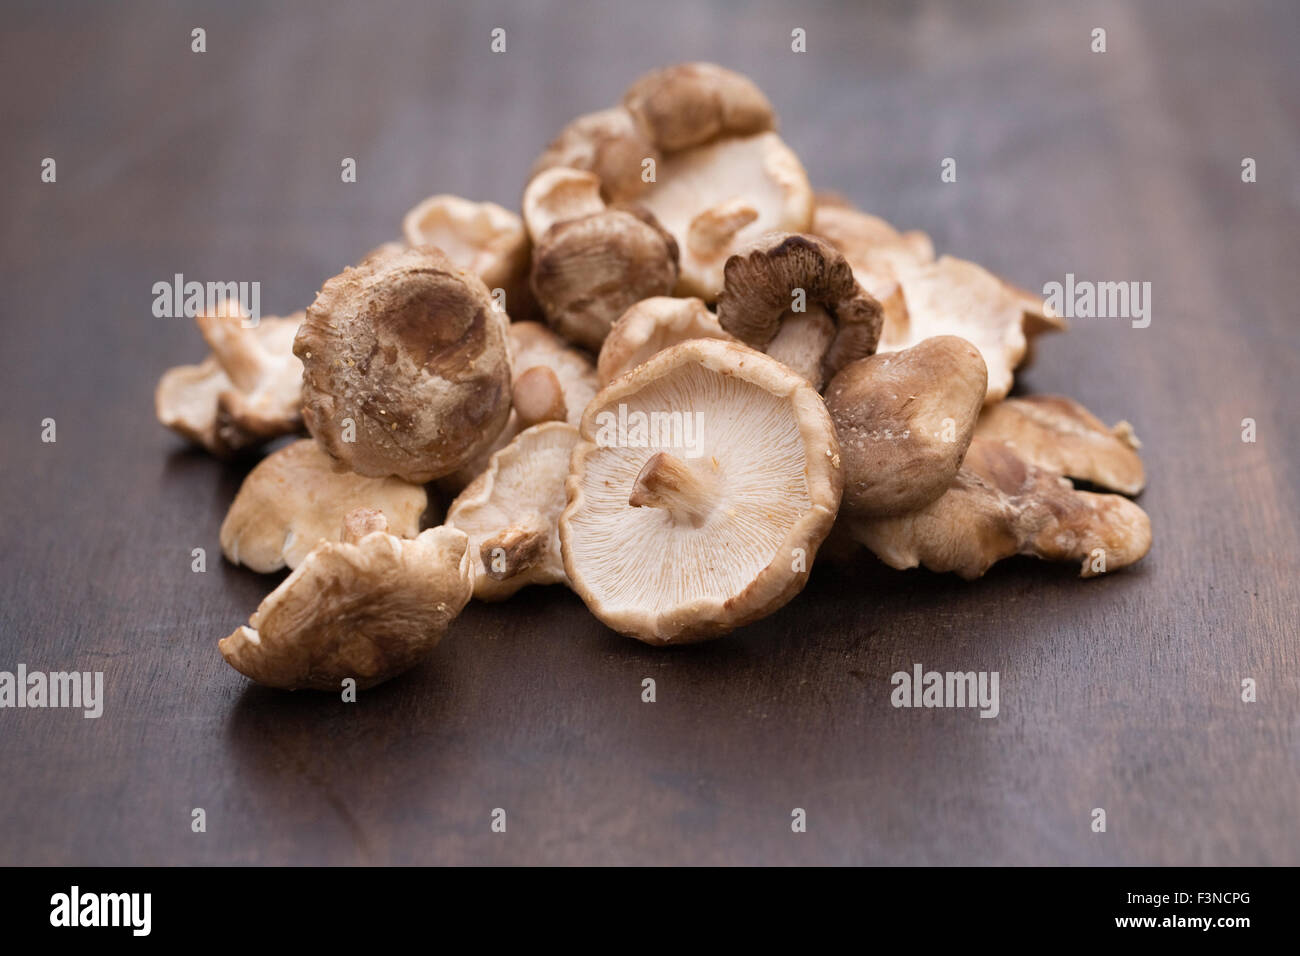 A selection of Shitake Mushrooms Stock Photo by ©antoine2000 2998995